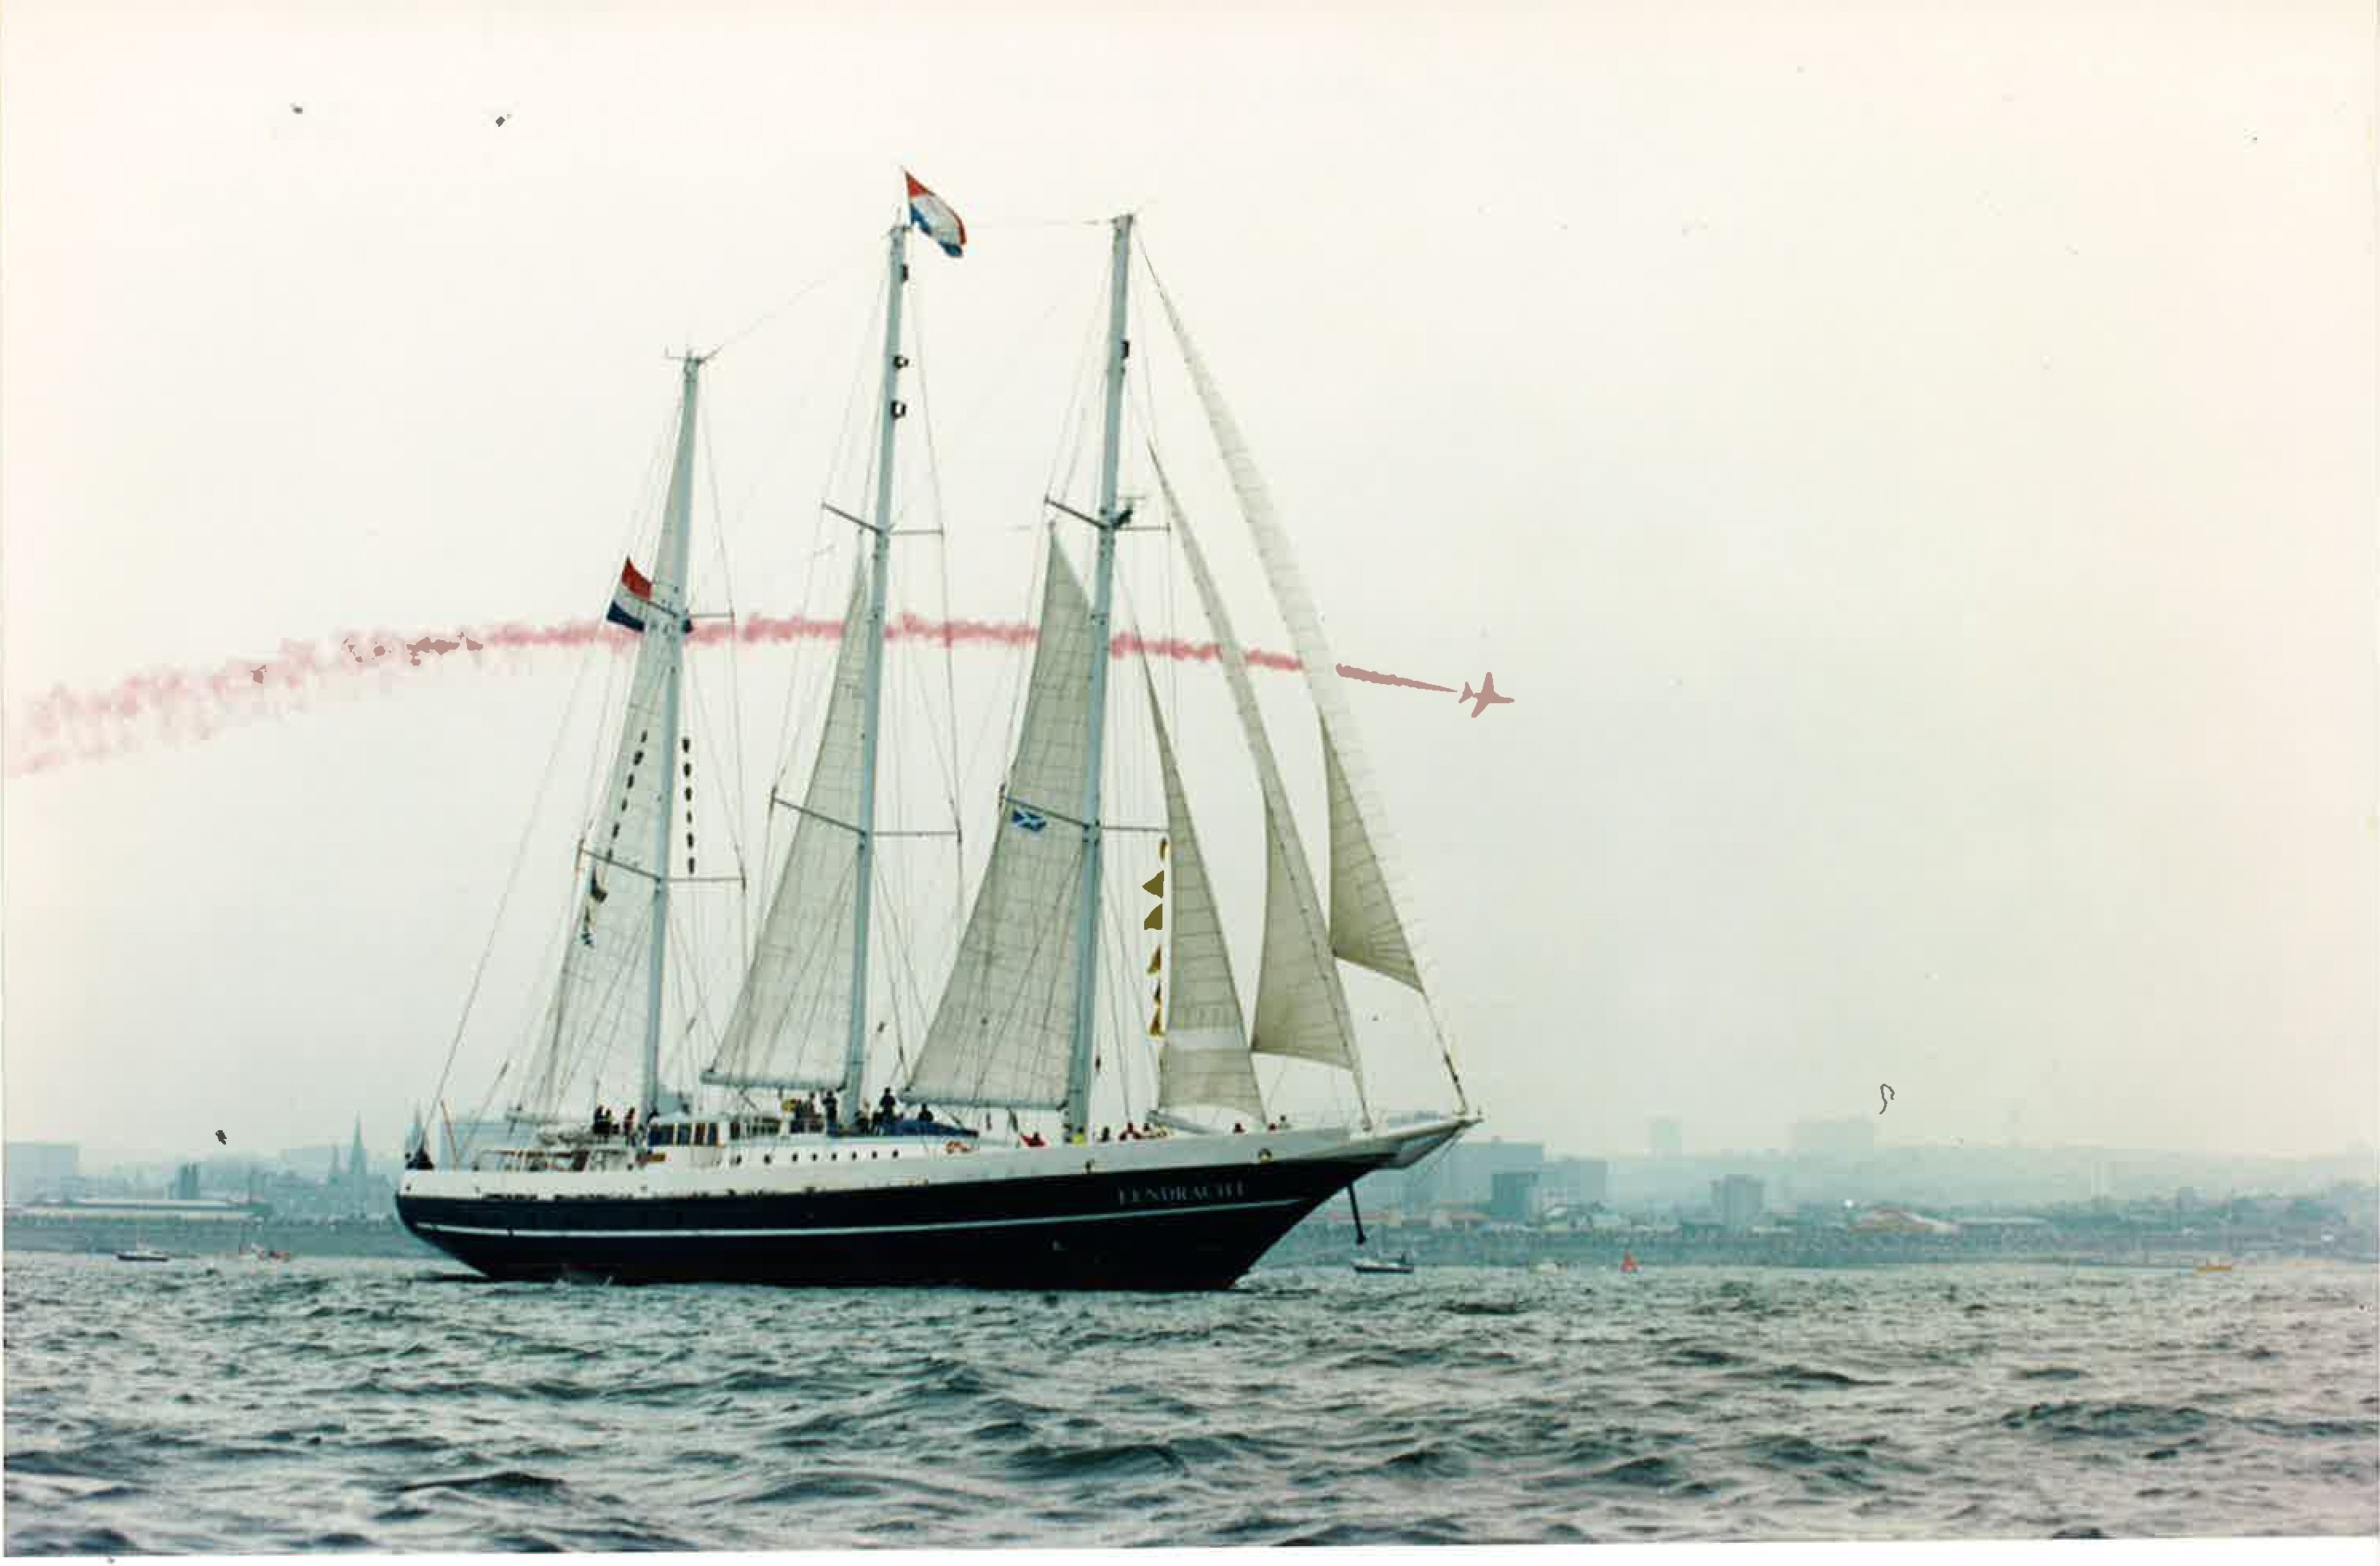 The Tall Ships Race last visited Aberdeen in 1997